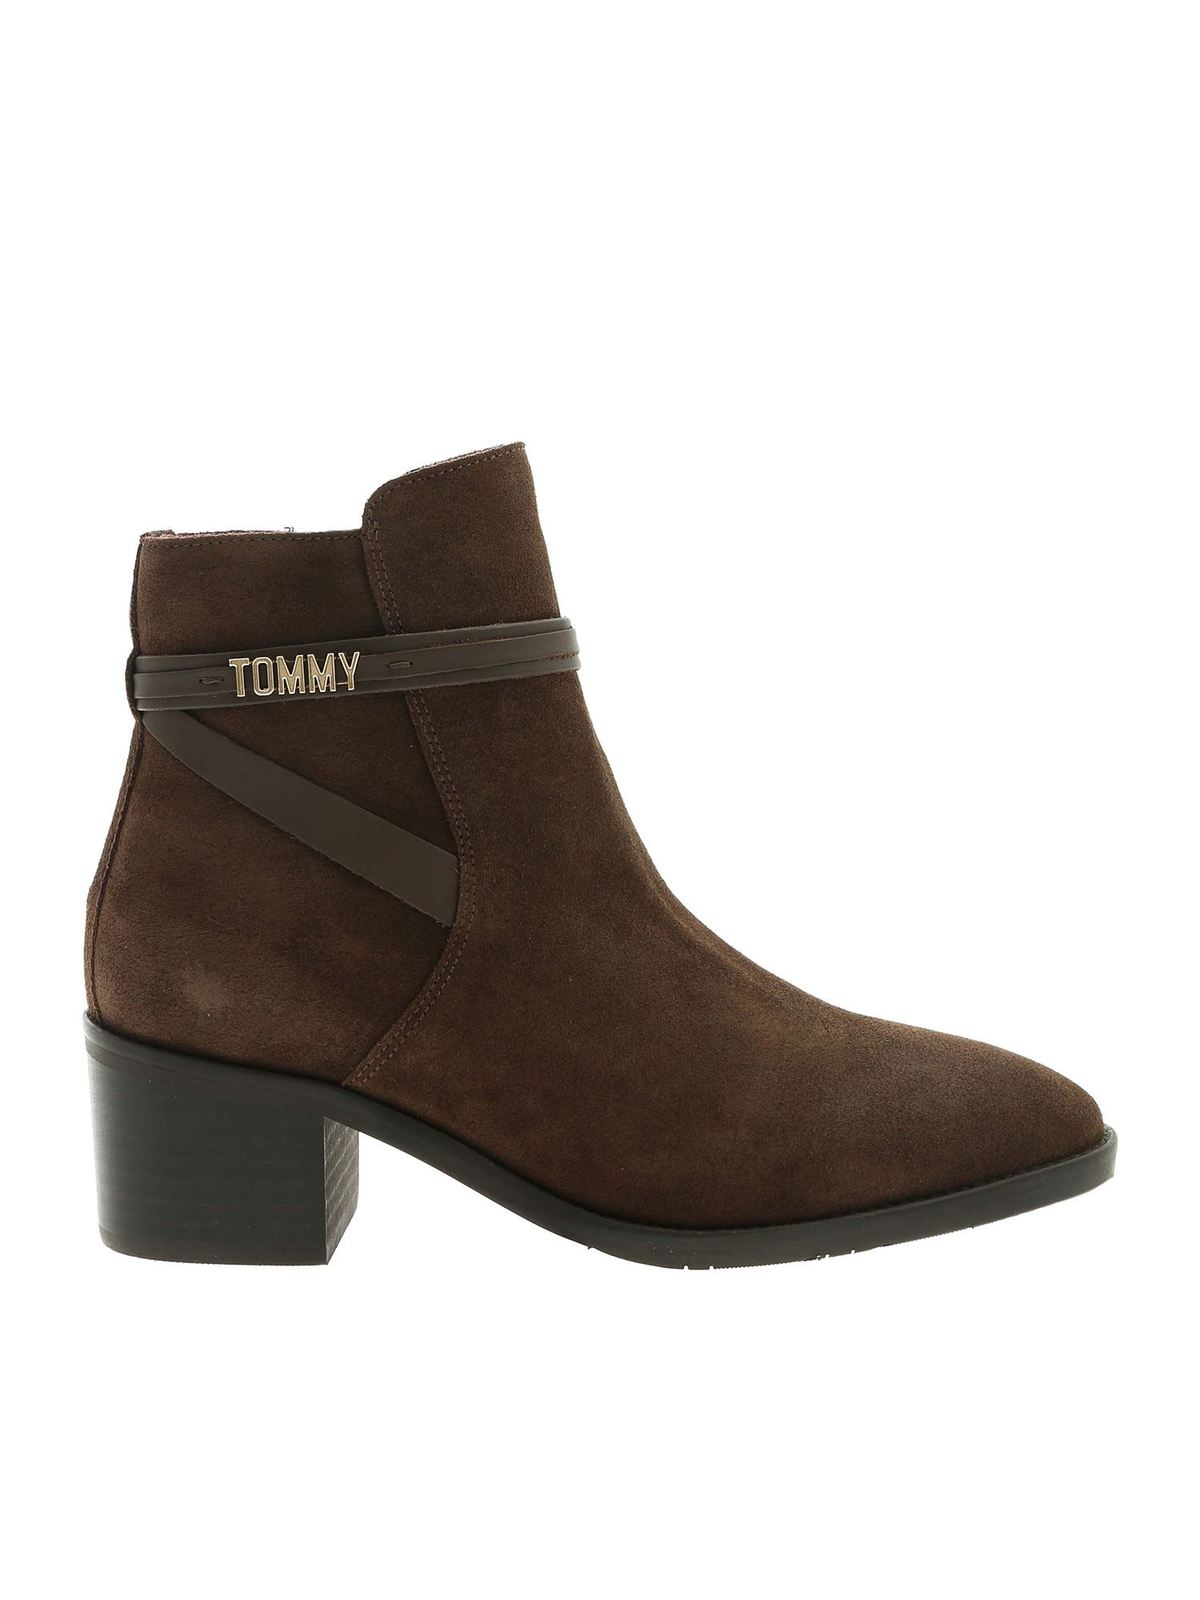 Tommy Hilfiger - Suede ankle boots in brown - FW0FW05178GT6